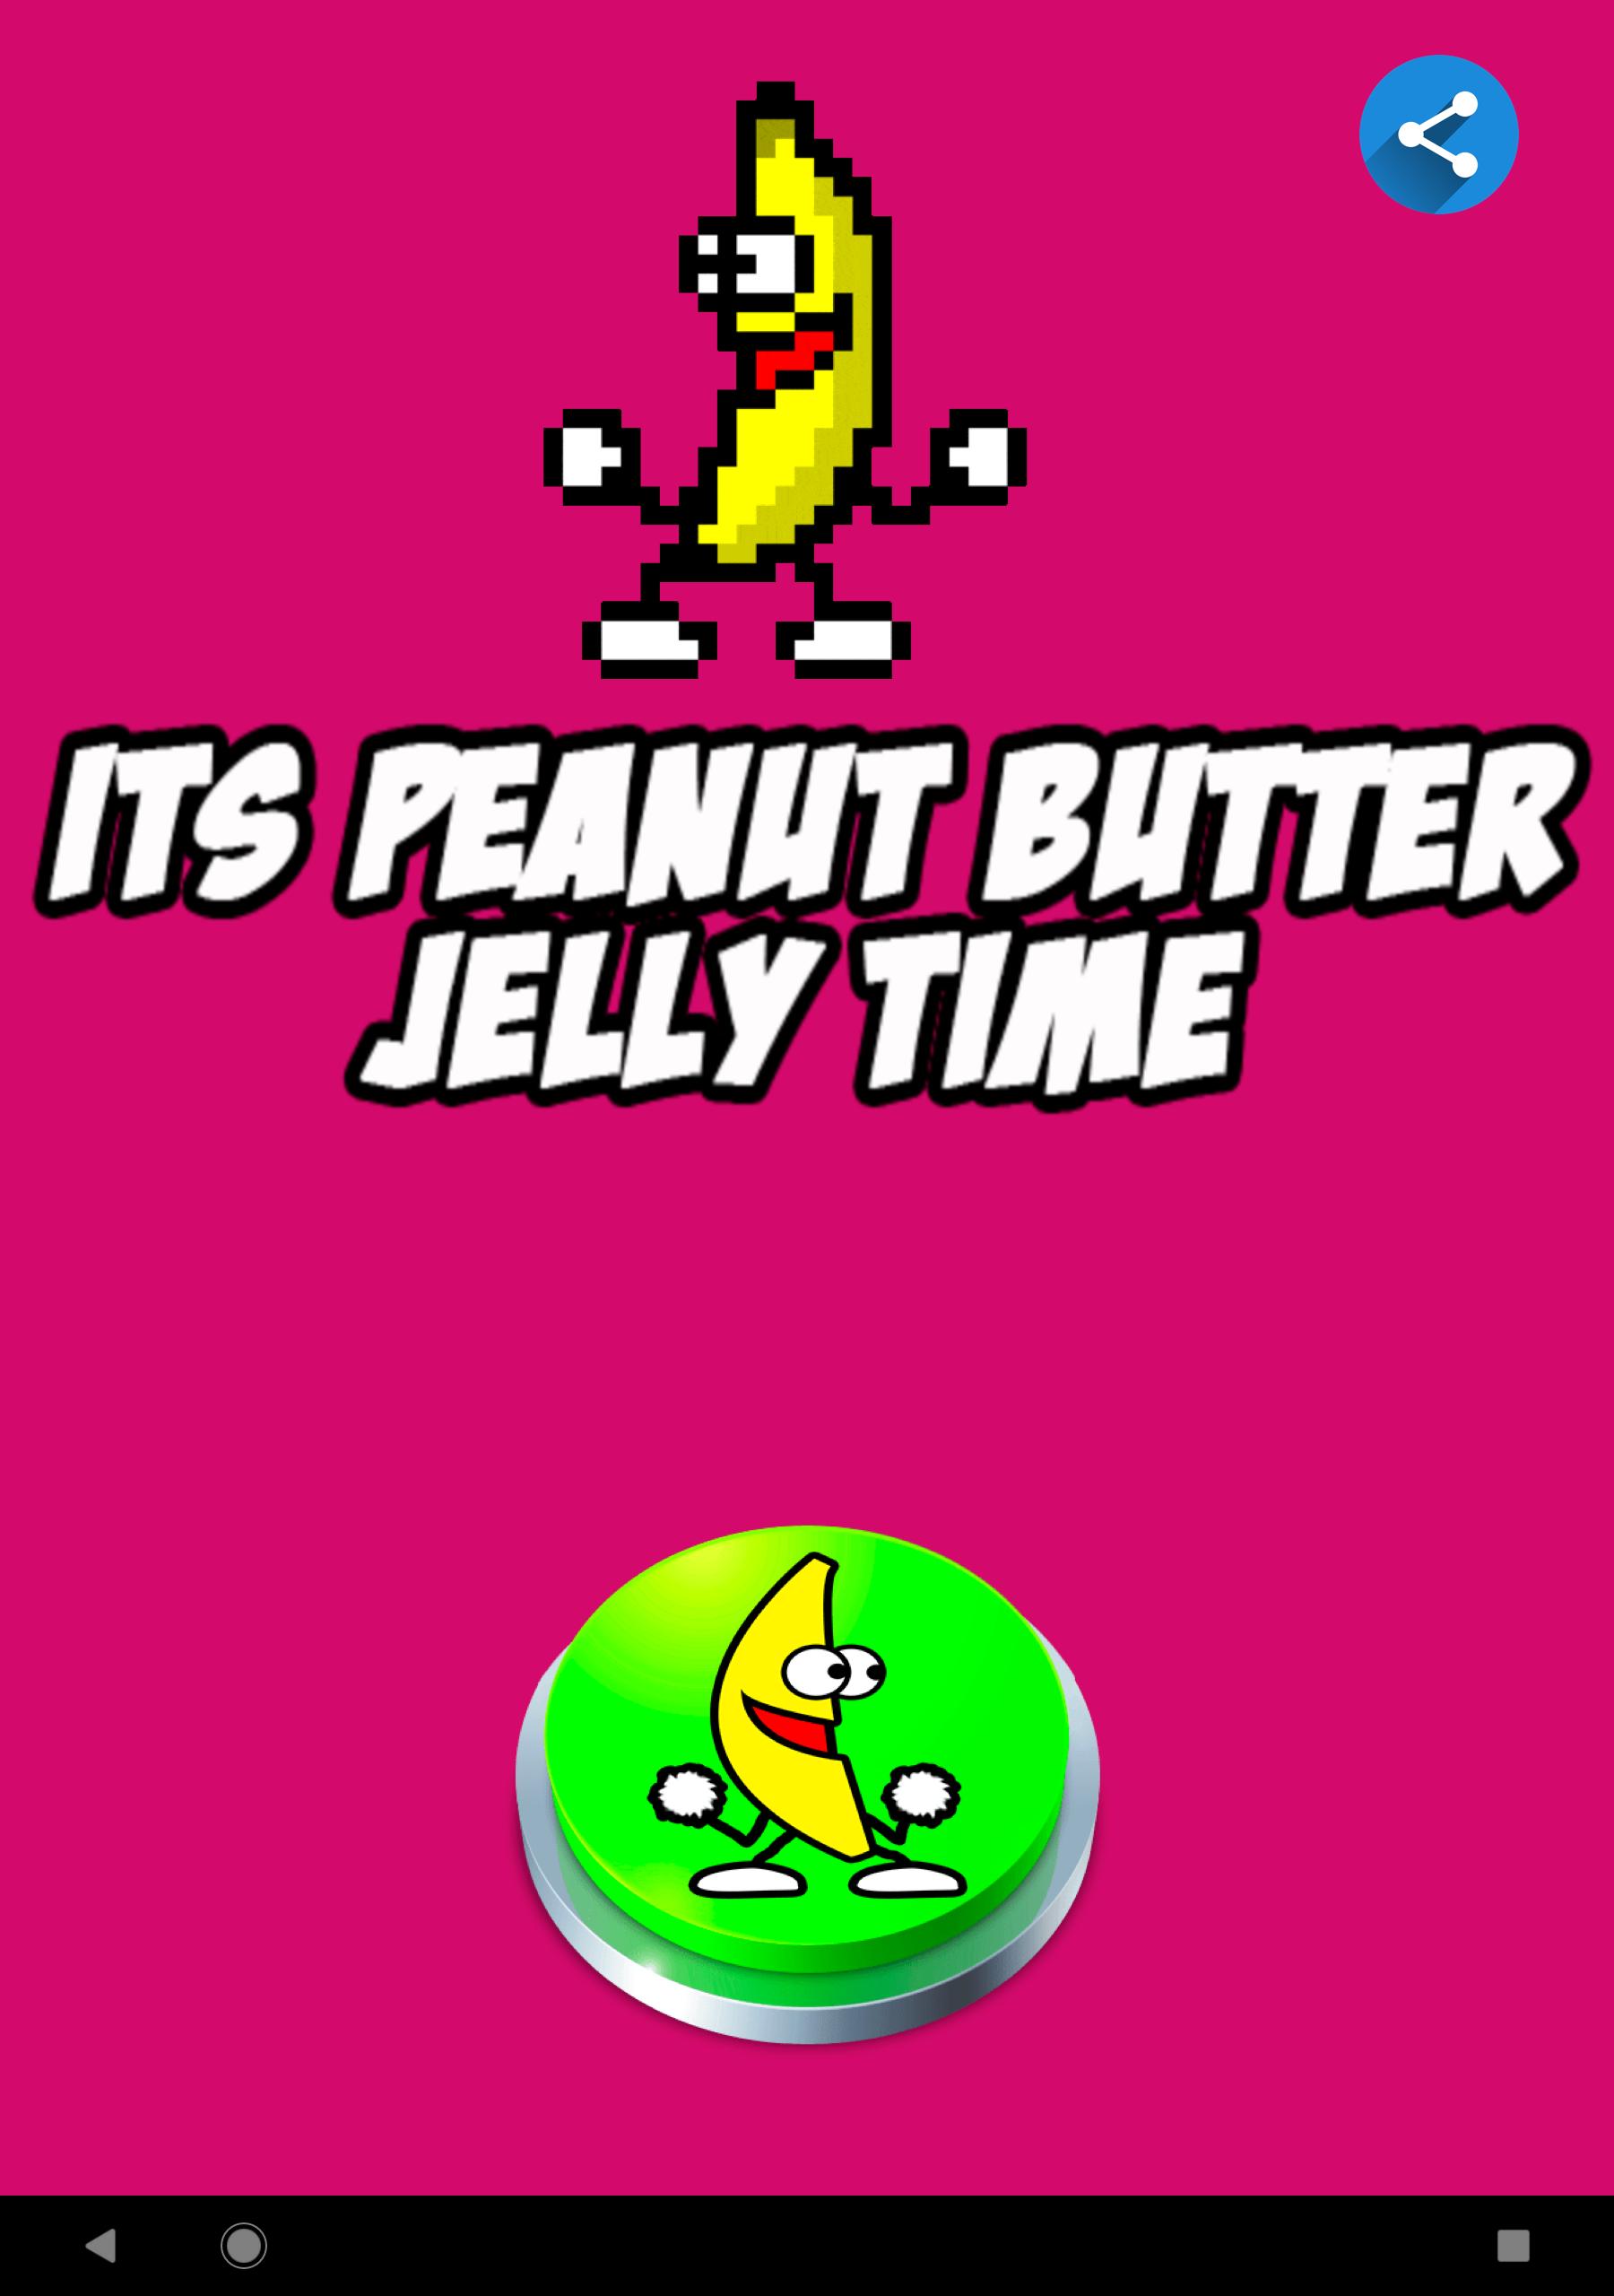 Peanut Butter Jelly time.